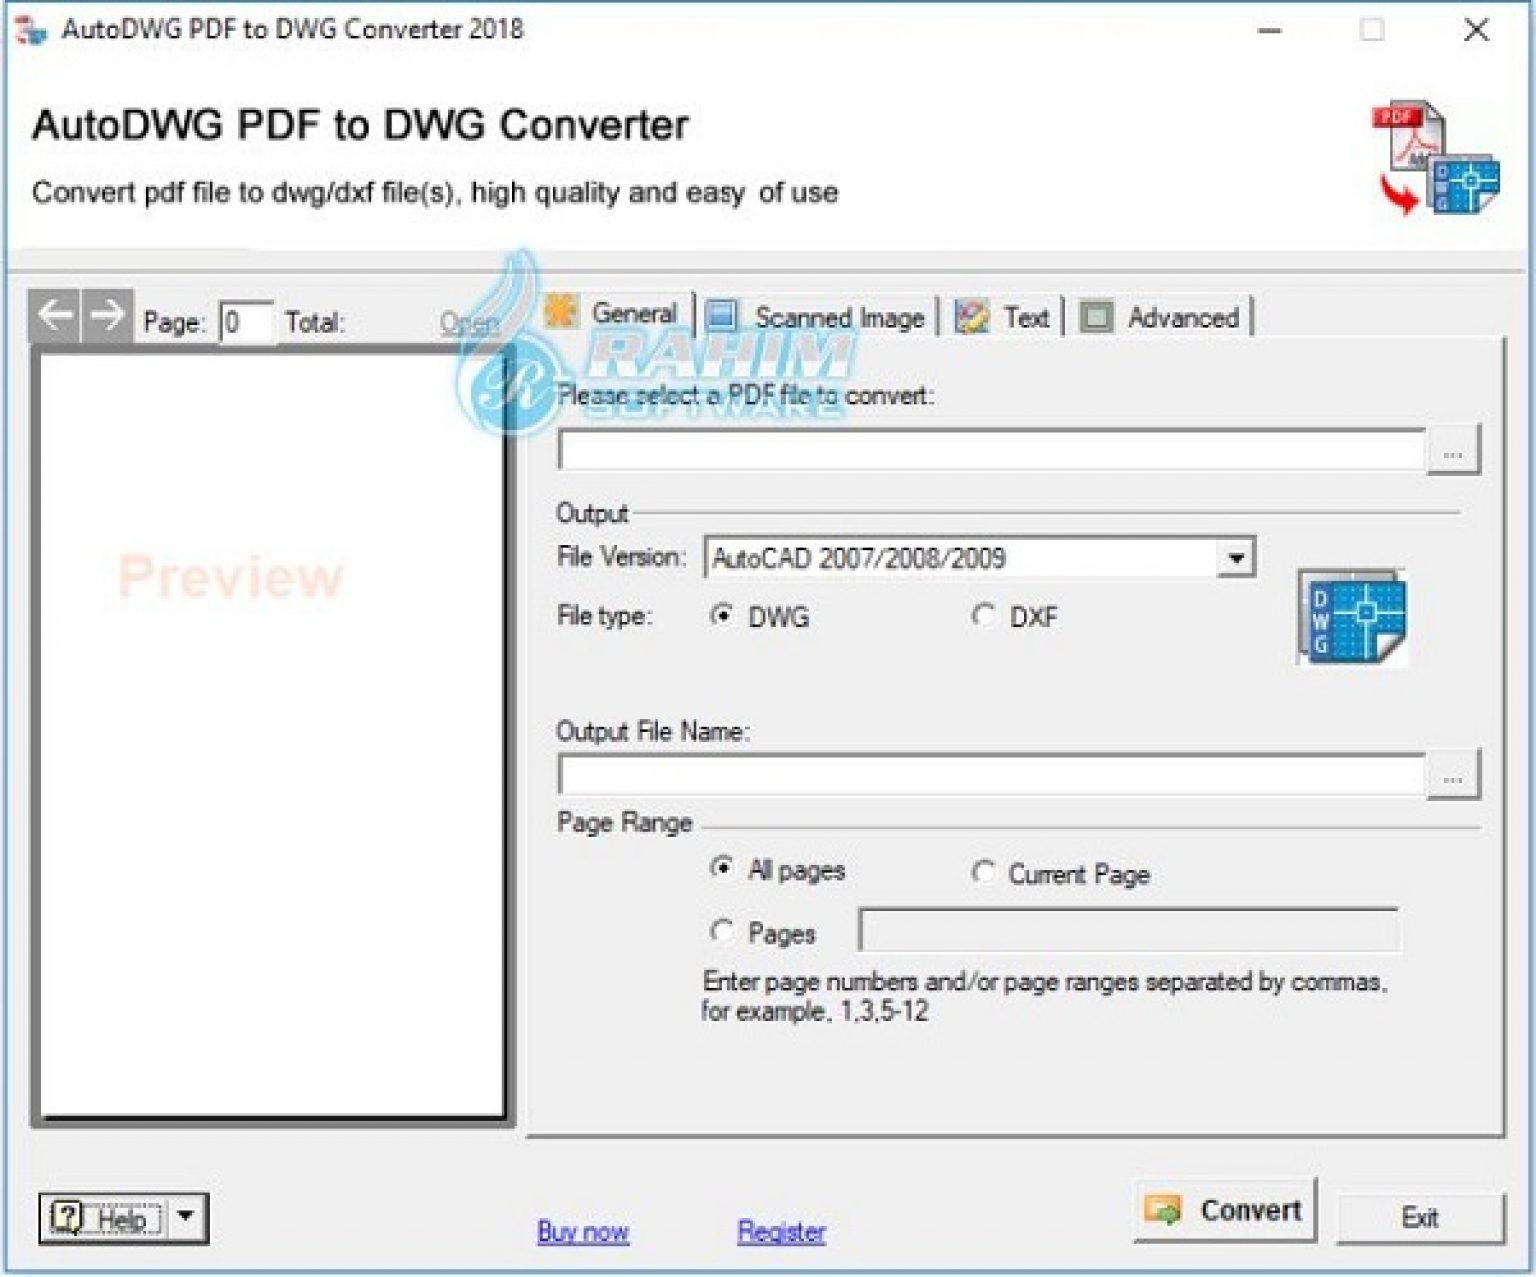 autodwg pdf to dwg converter vs any pdf to dwg converter